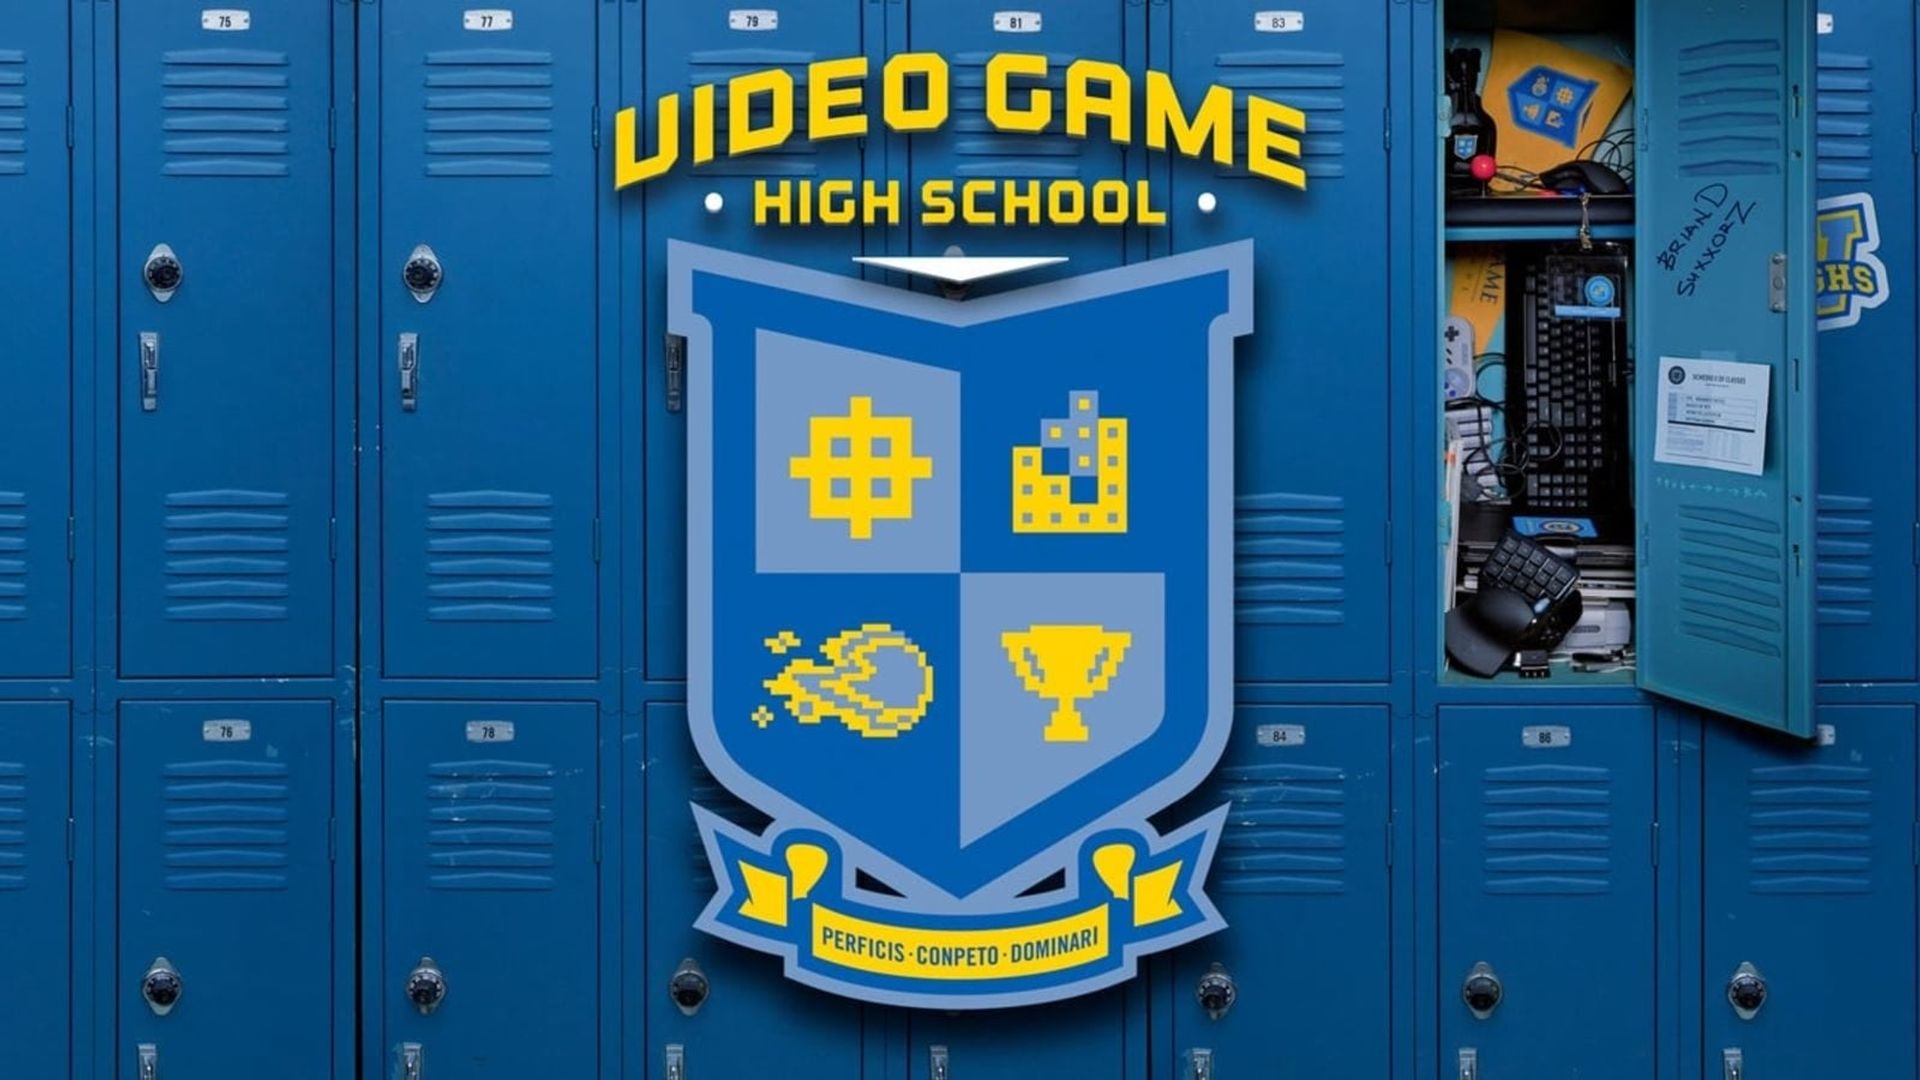 VGHS: The Movie background